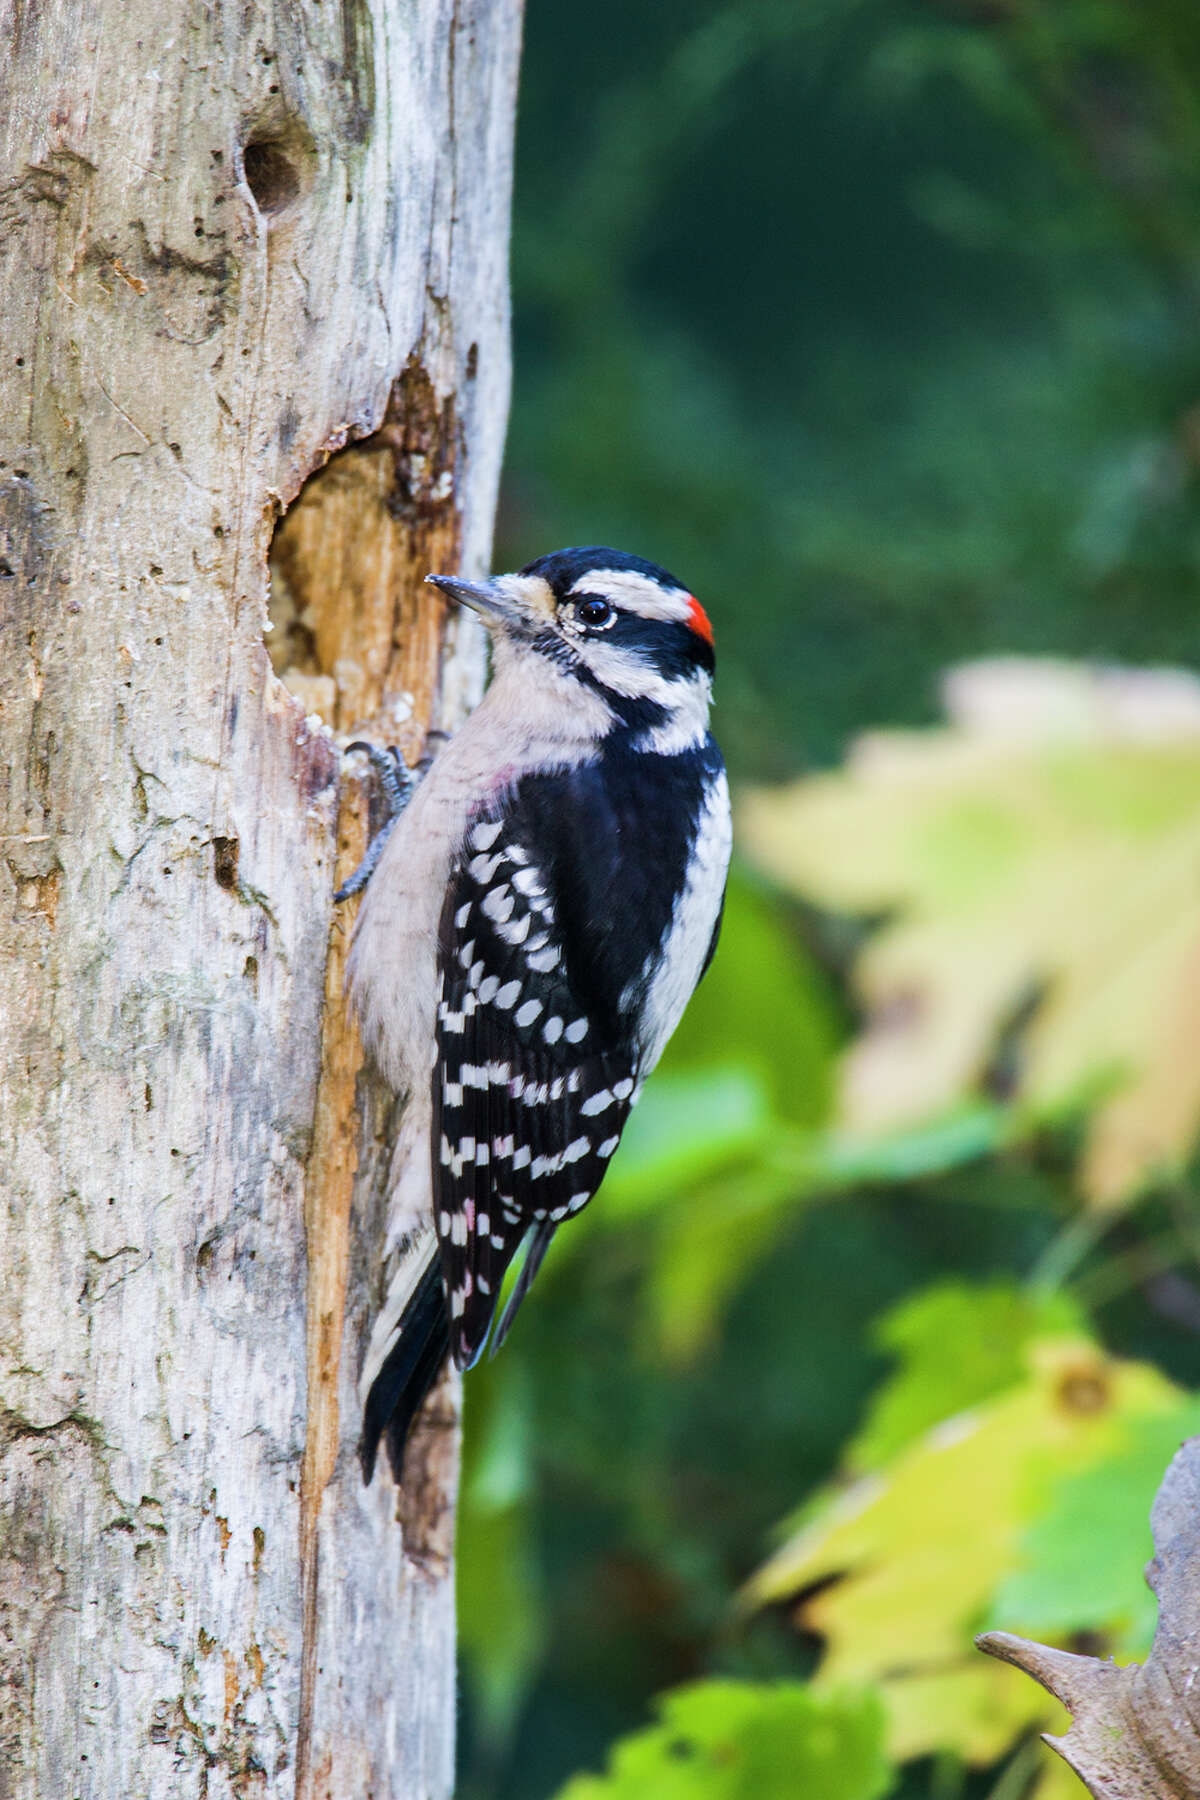 A male downy woodpecker has a red patch on the back of his head. Photo Credit: Kathy Adams Clark. Restricted use.